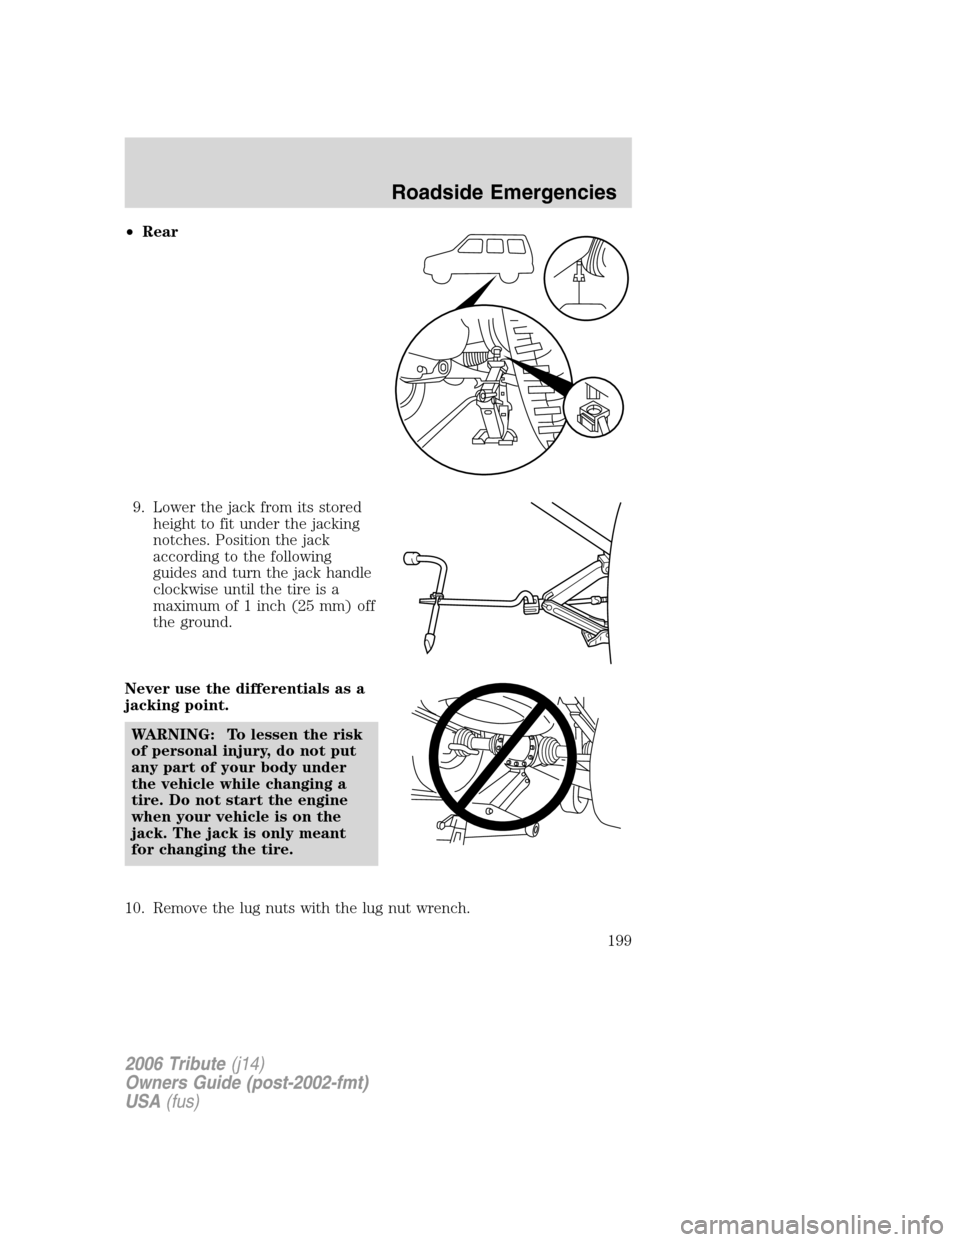 MAZDA MODEL TRIBUTE 2006  Owners Manual (in English) •Rear
9. Lower the jack from its stored
height to fit under the jacking
notches. Position the jack
according to the following
guides and turn the jack handle
clockwise until the tire is a
maximum of